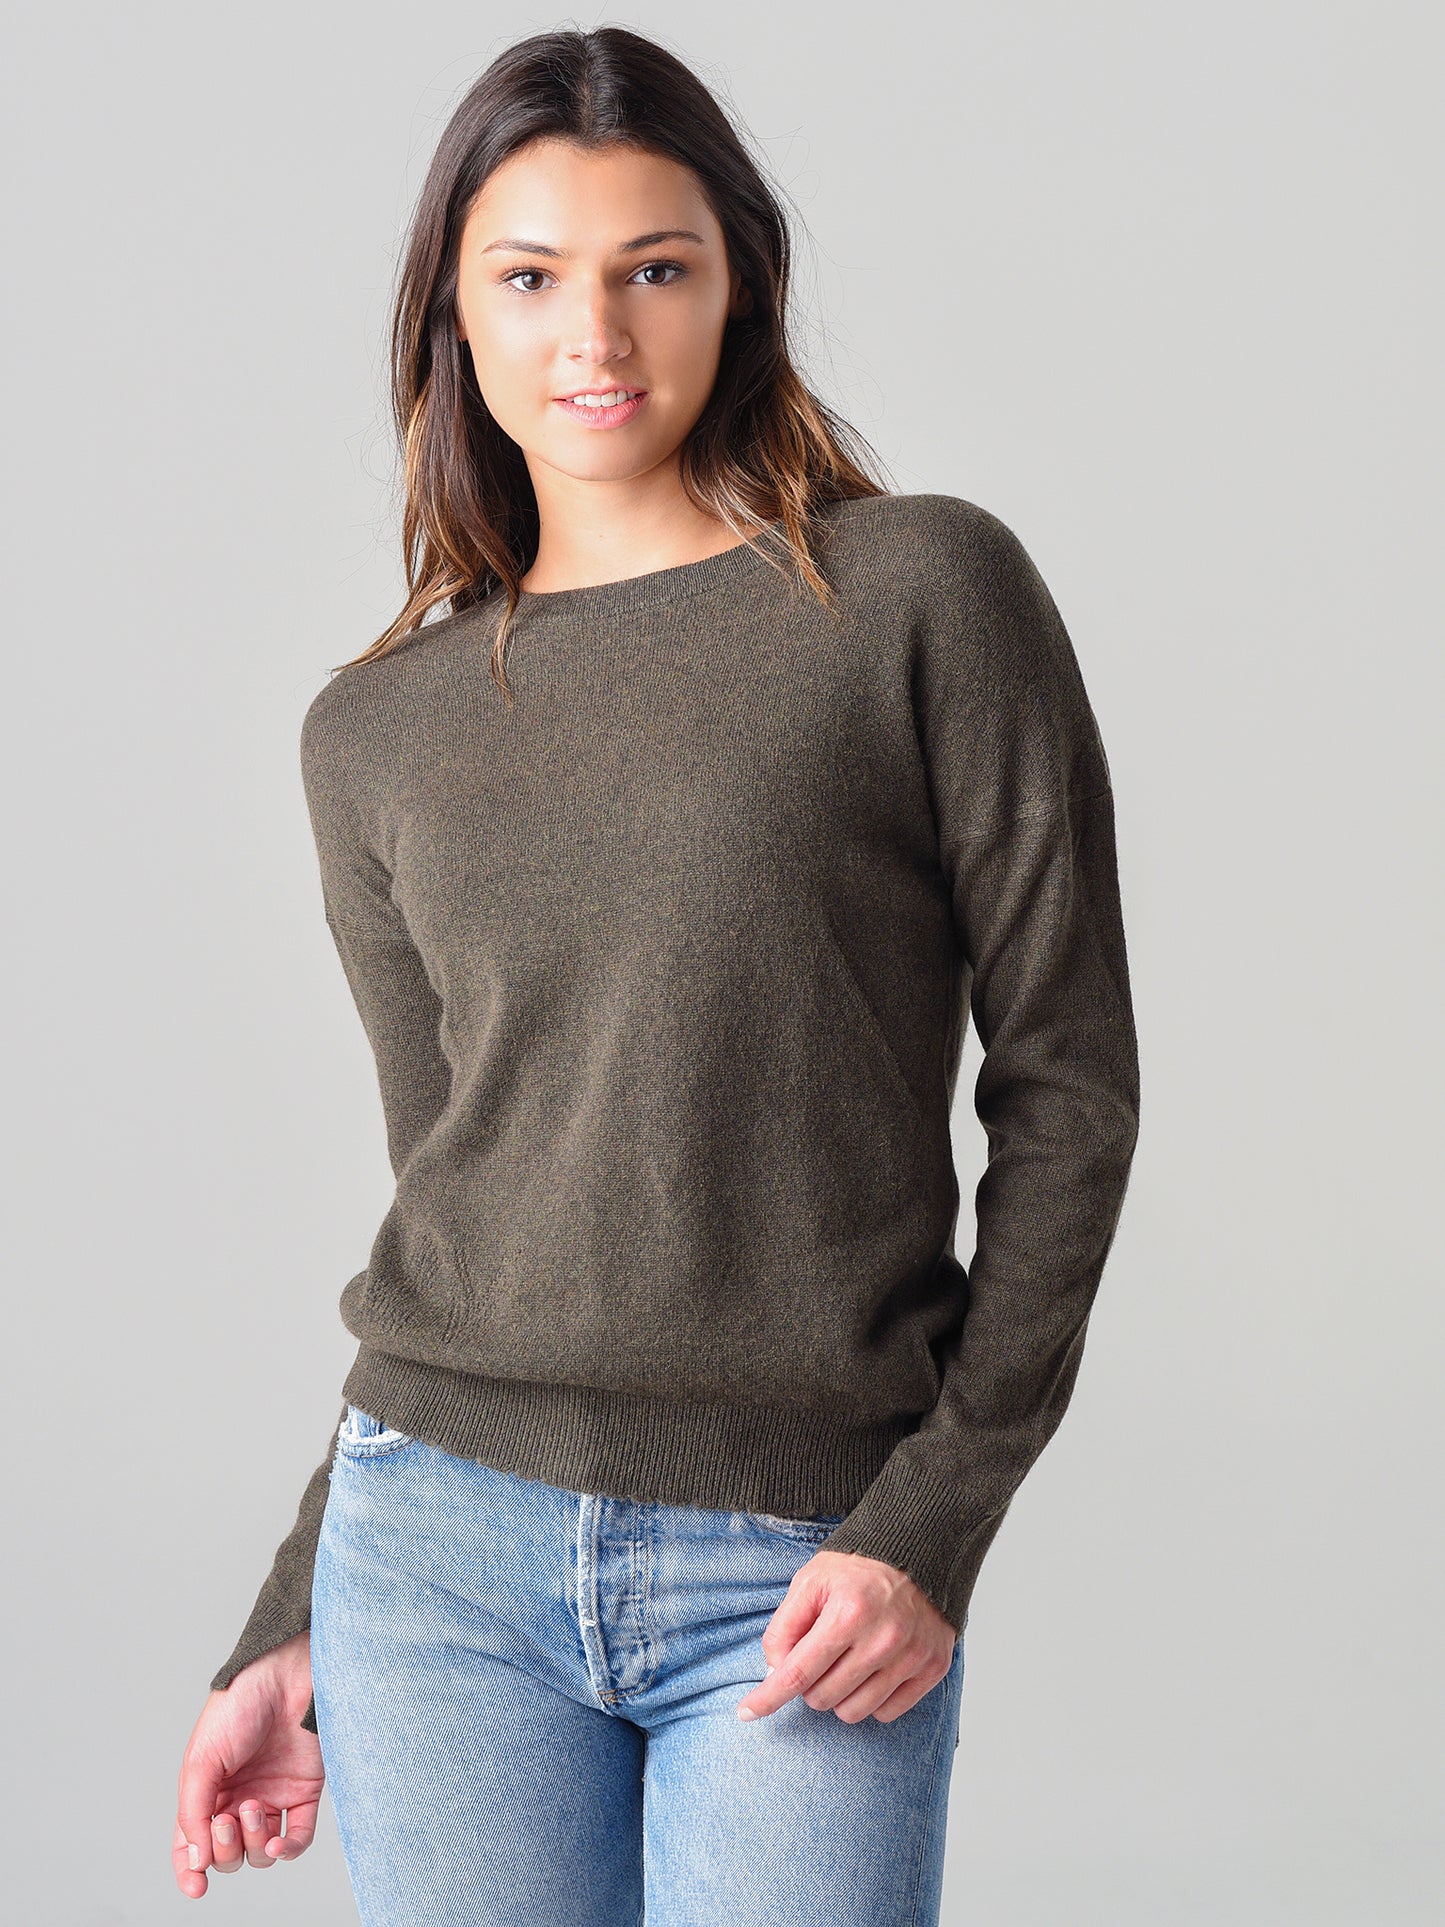 Zadig & Voltaire Women's Cici Cashmere Patch Sweater